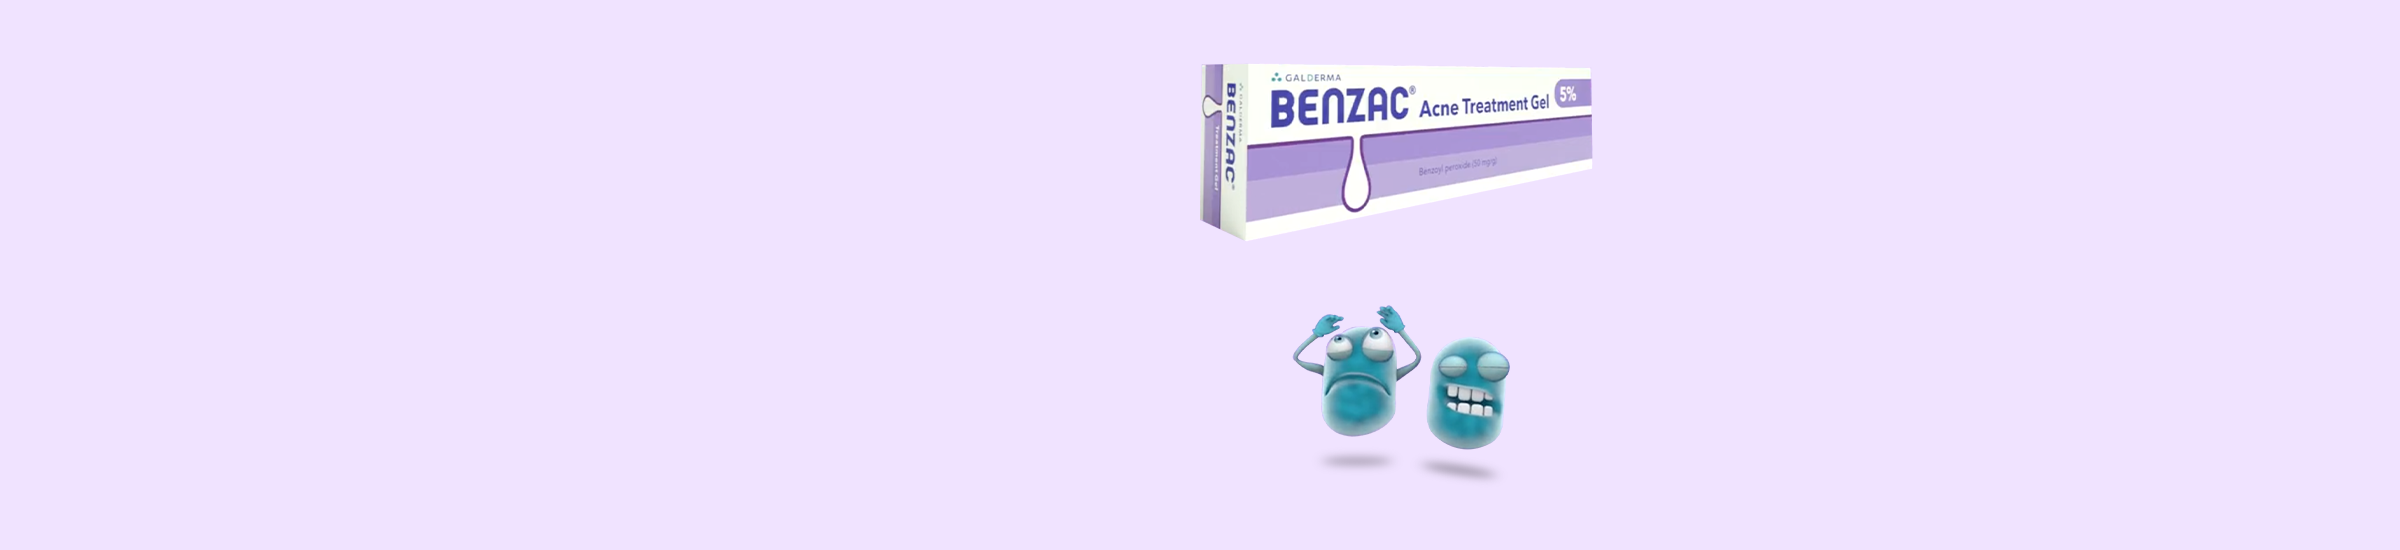 Benzac kills the bacteria that causes acne